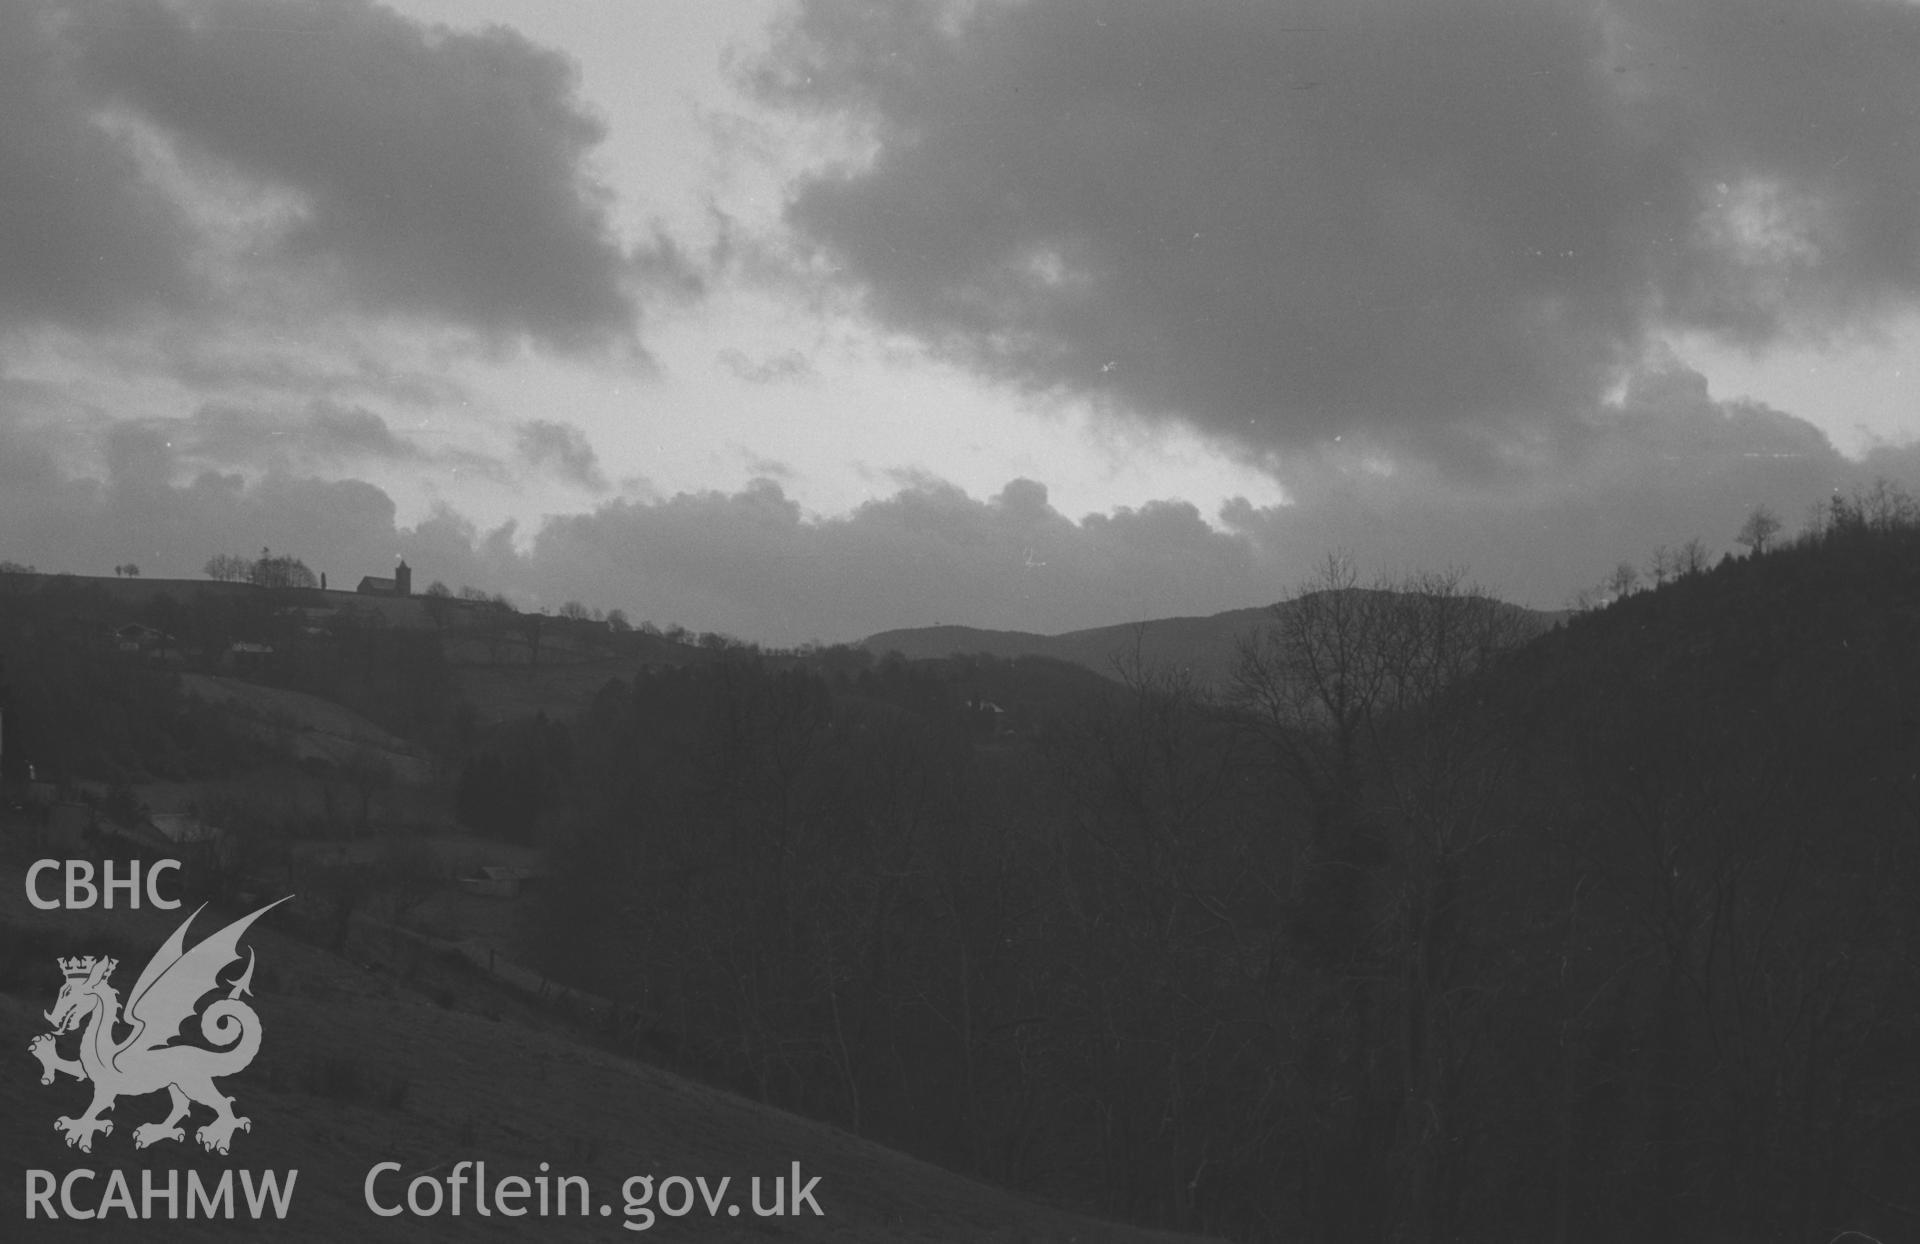 Digital copy of a black and white negative showing distant view of Ysbyty Ystwyth including church on skyline. Photographed by Arthur O. Chater in April 1965 from Pontrhydygroes, Grid Reference SN 739 725, looking south west.